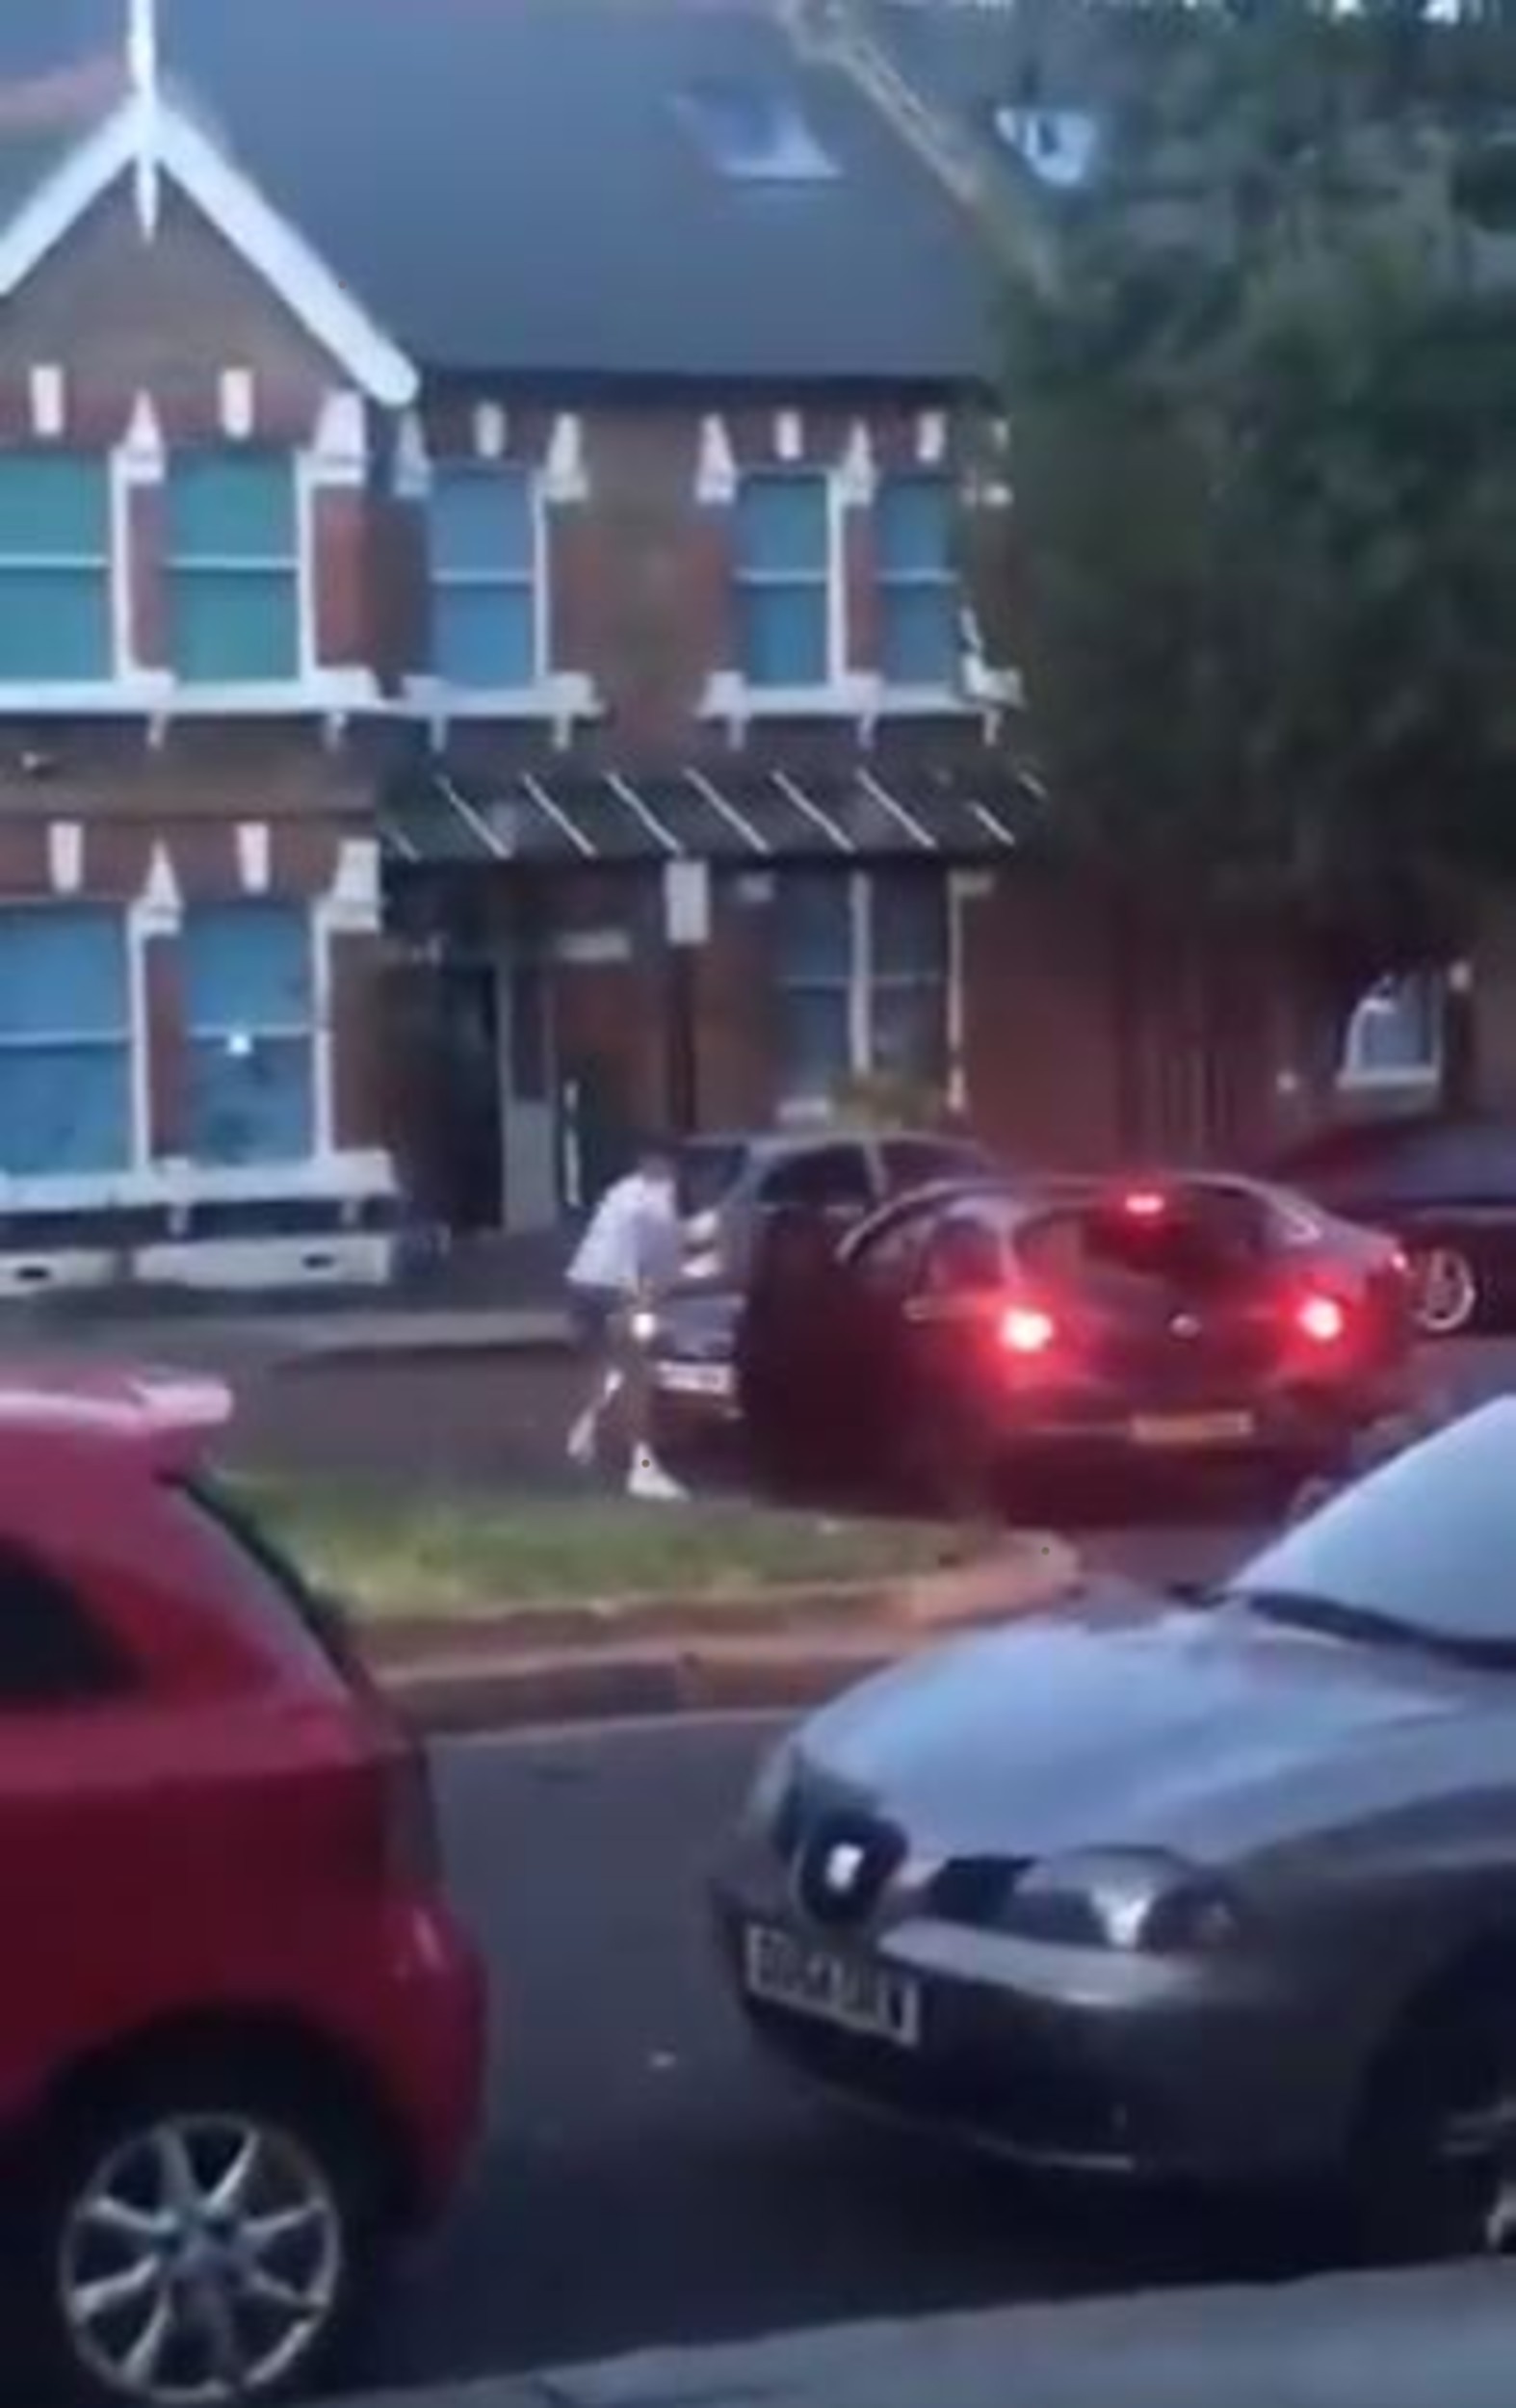 One of the men approaches the car and strikes it with an object in his hand.- Viral Video News